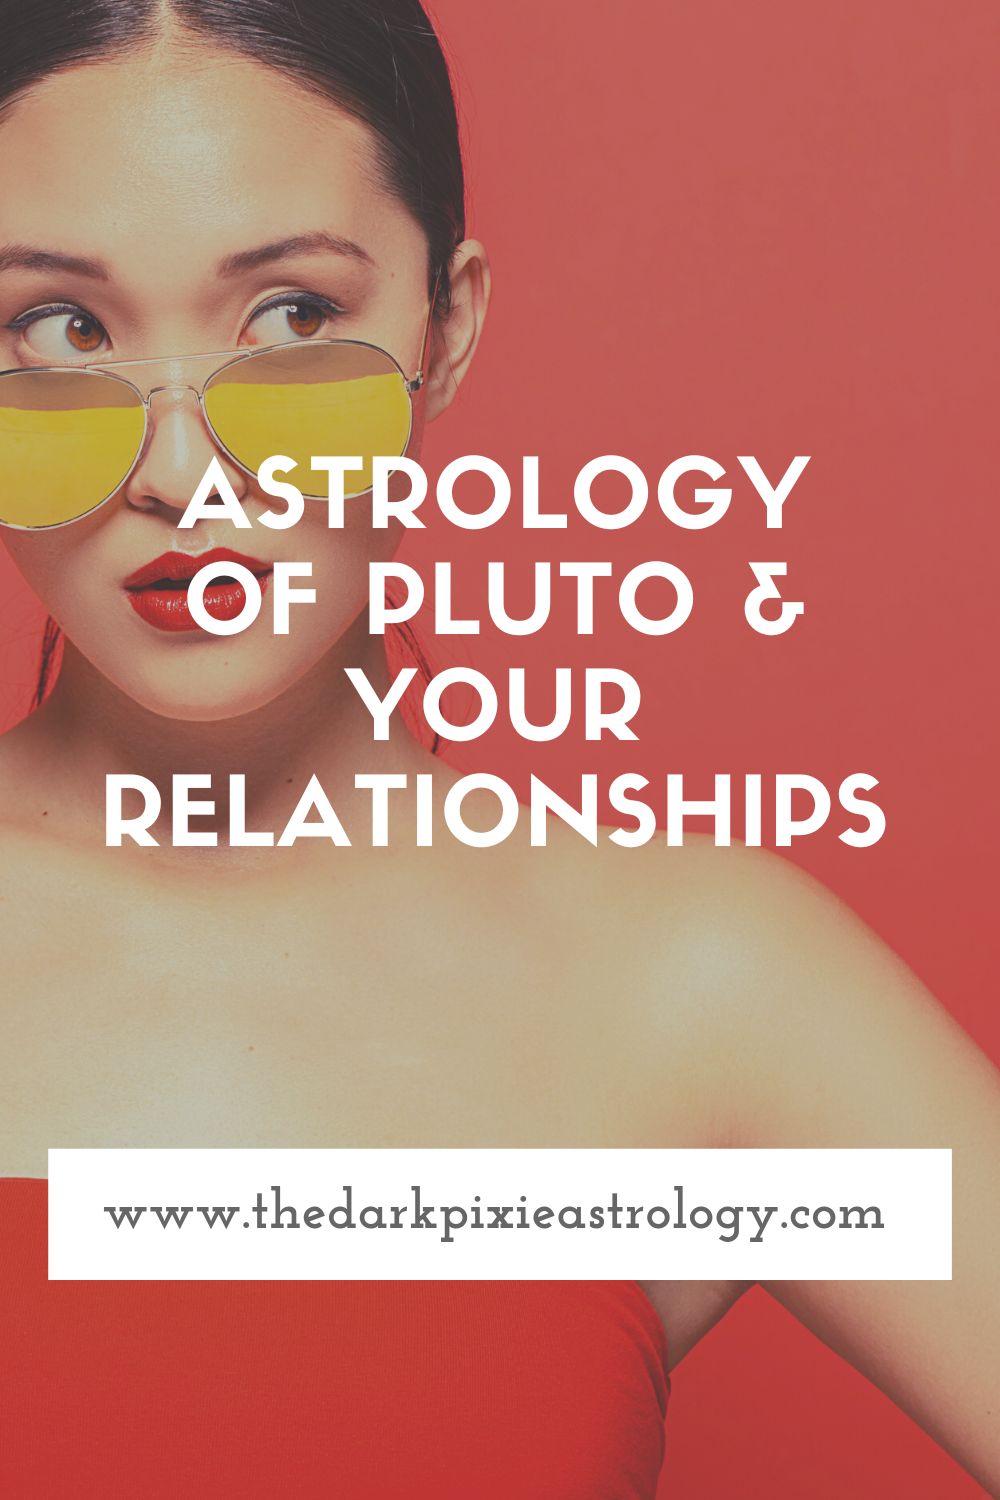 Astrology of Pluto & Your Relationships - The Dark Pixie Astrology